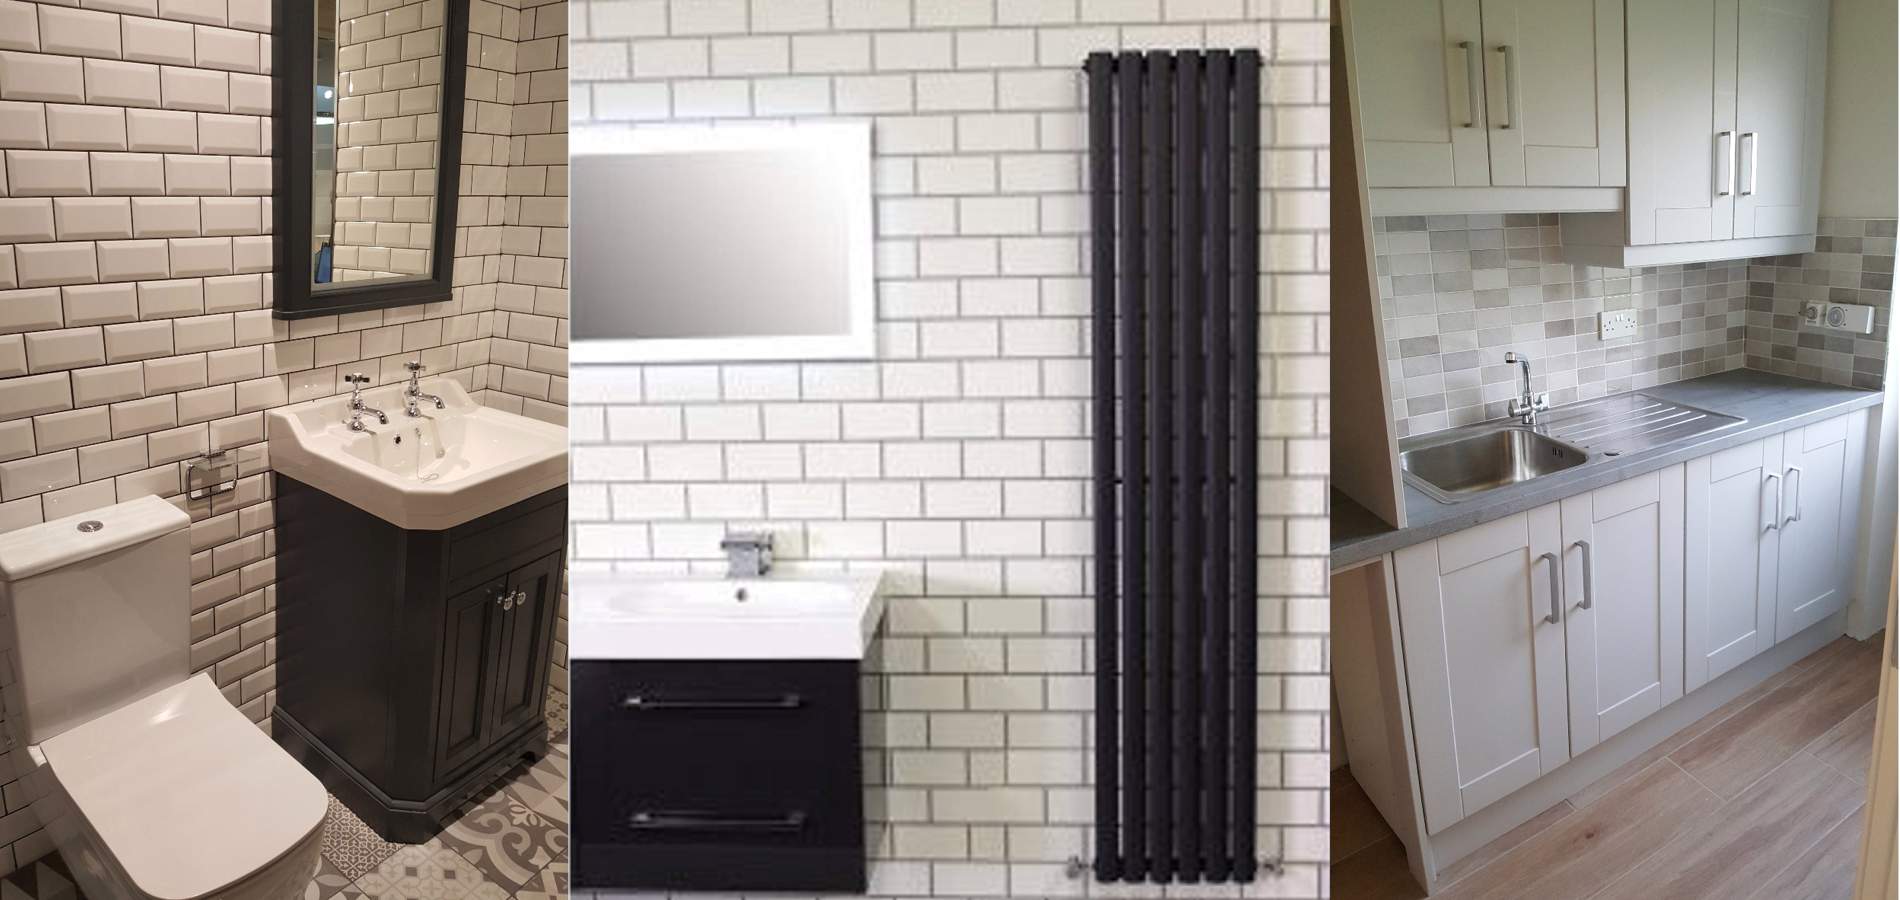 Kitchen & bathroom Wall Tiles by North West Tiles & Timber, Co. Leitrim, Ireland